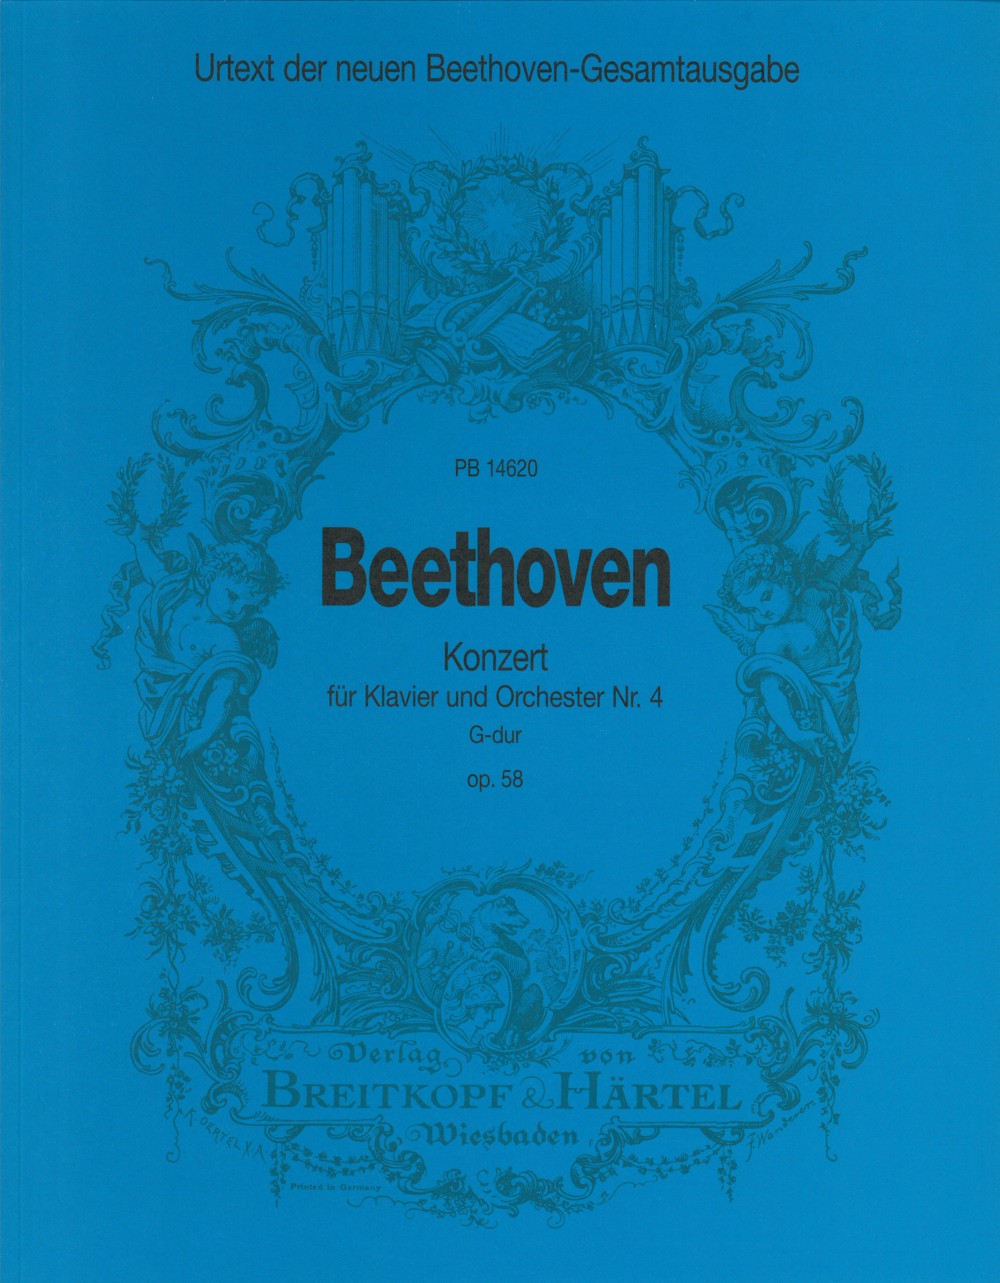 Beethoven Piano Concerto No. 4 in G major Op. 58 - Large Score